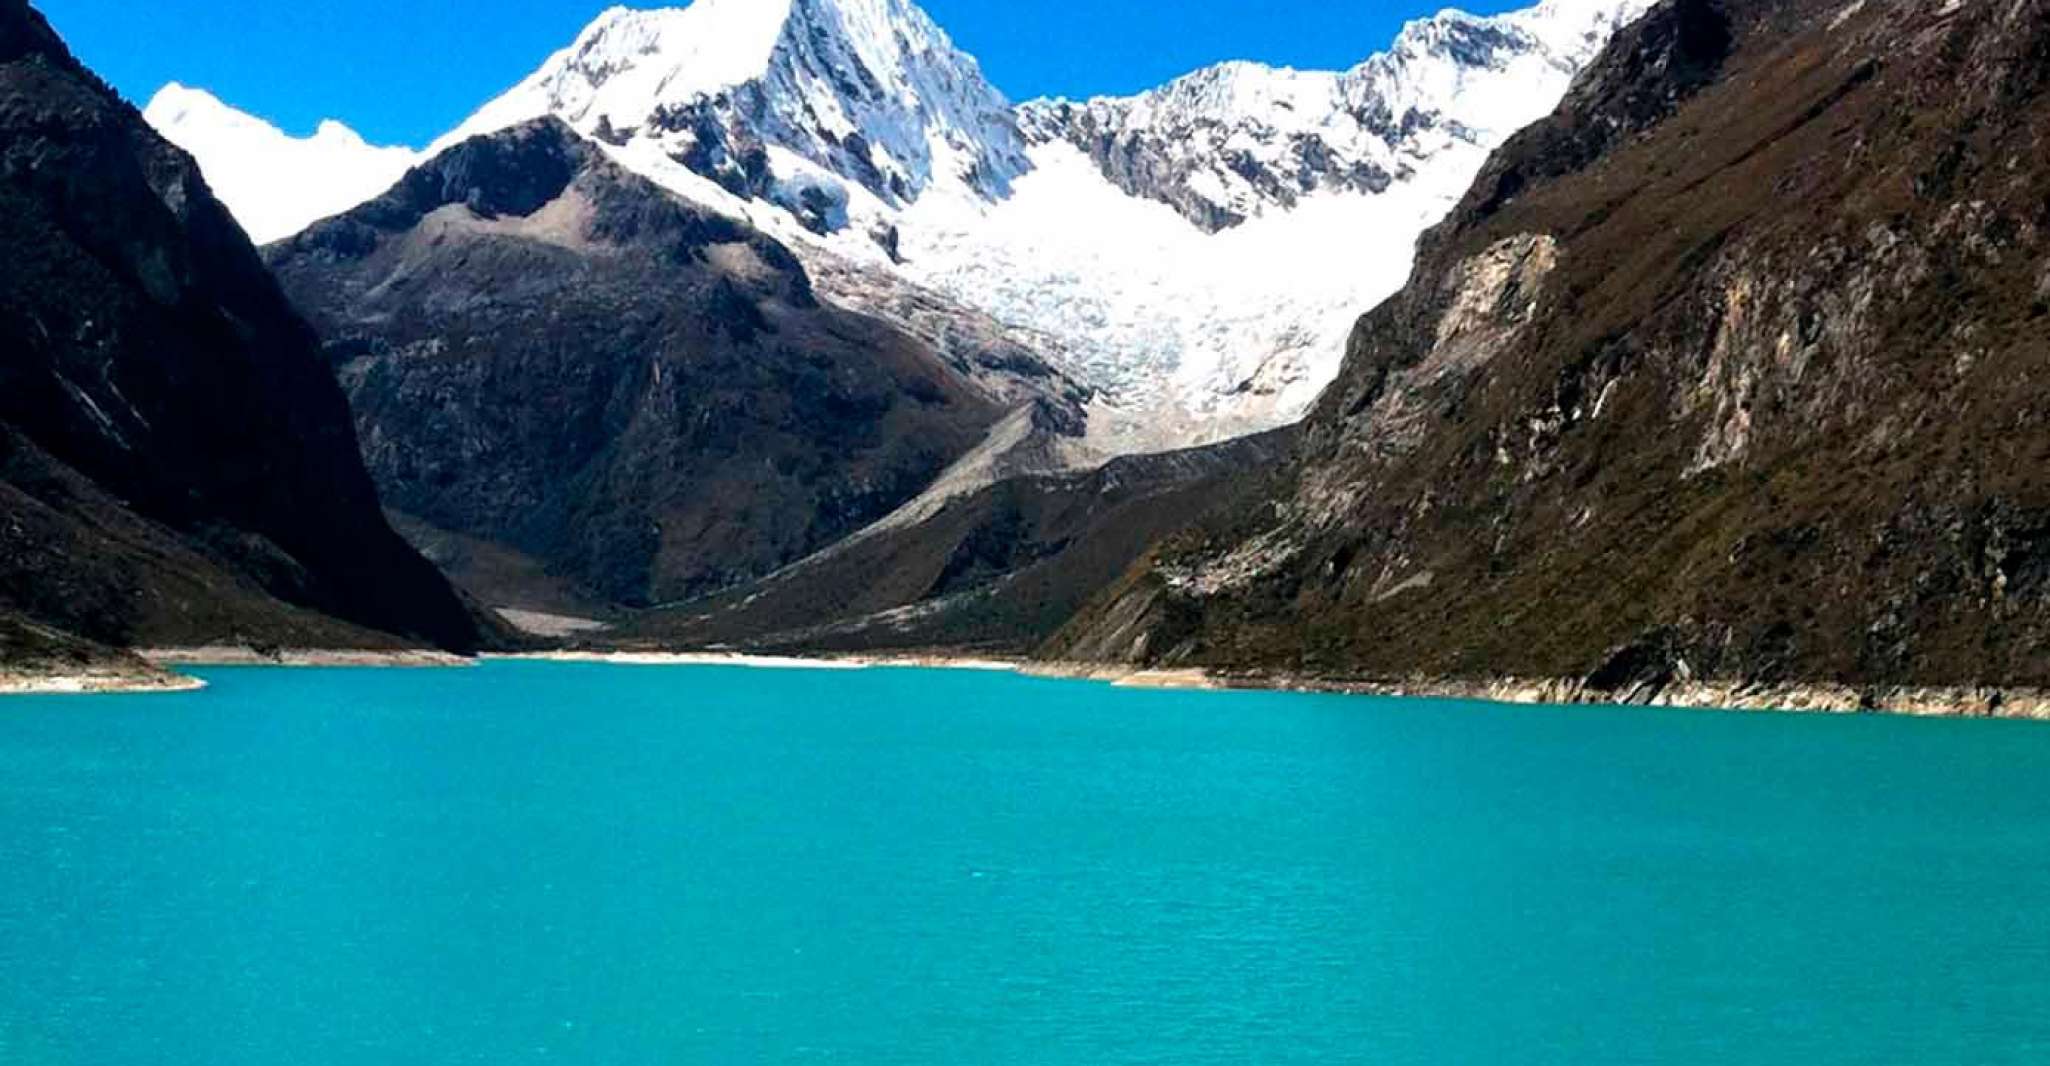 From Huaraz || The best trekking and hiking trails in Parón - Housity